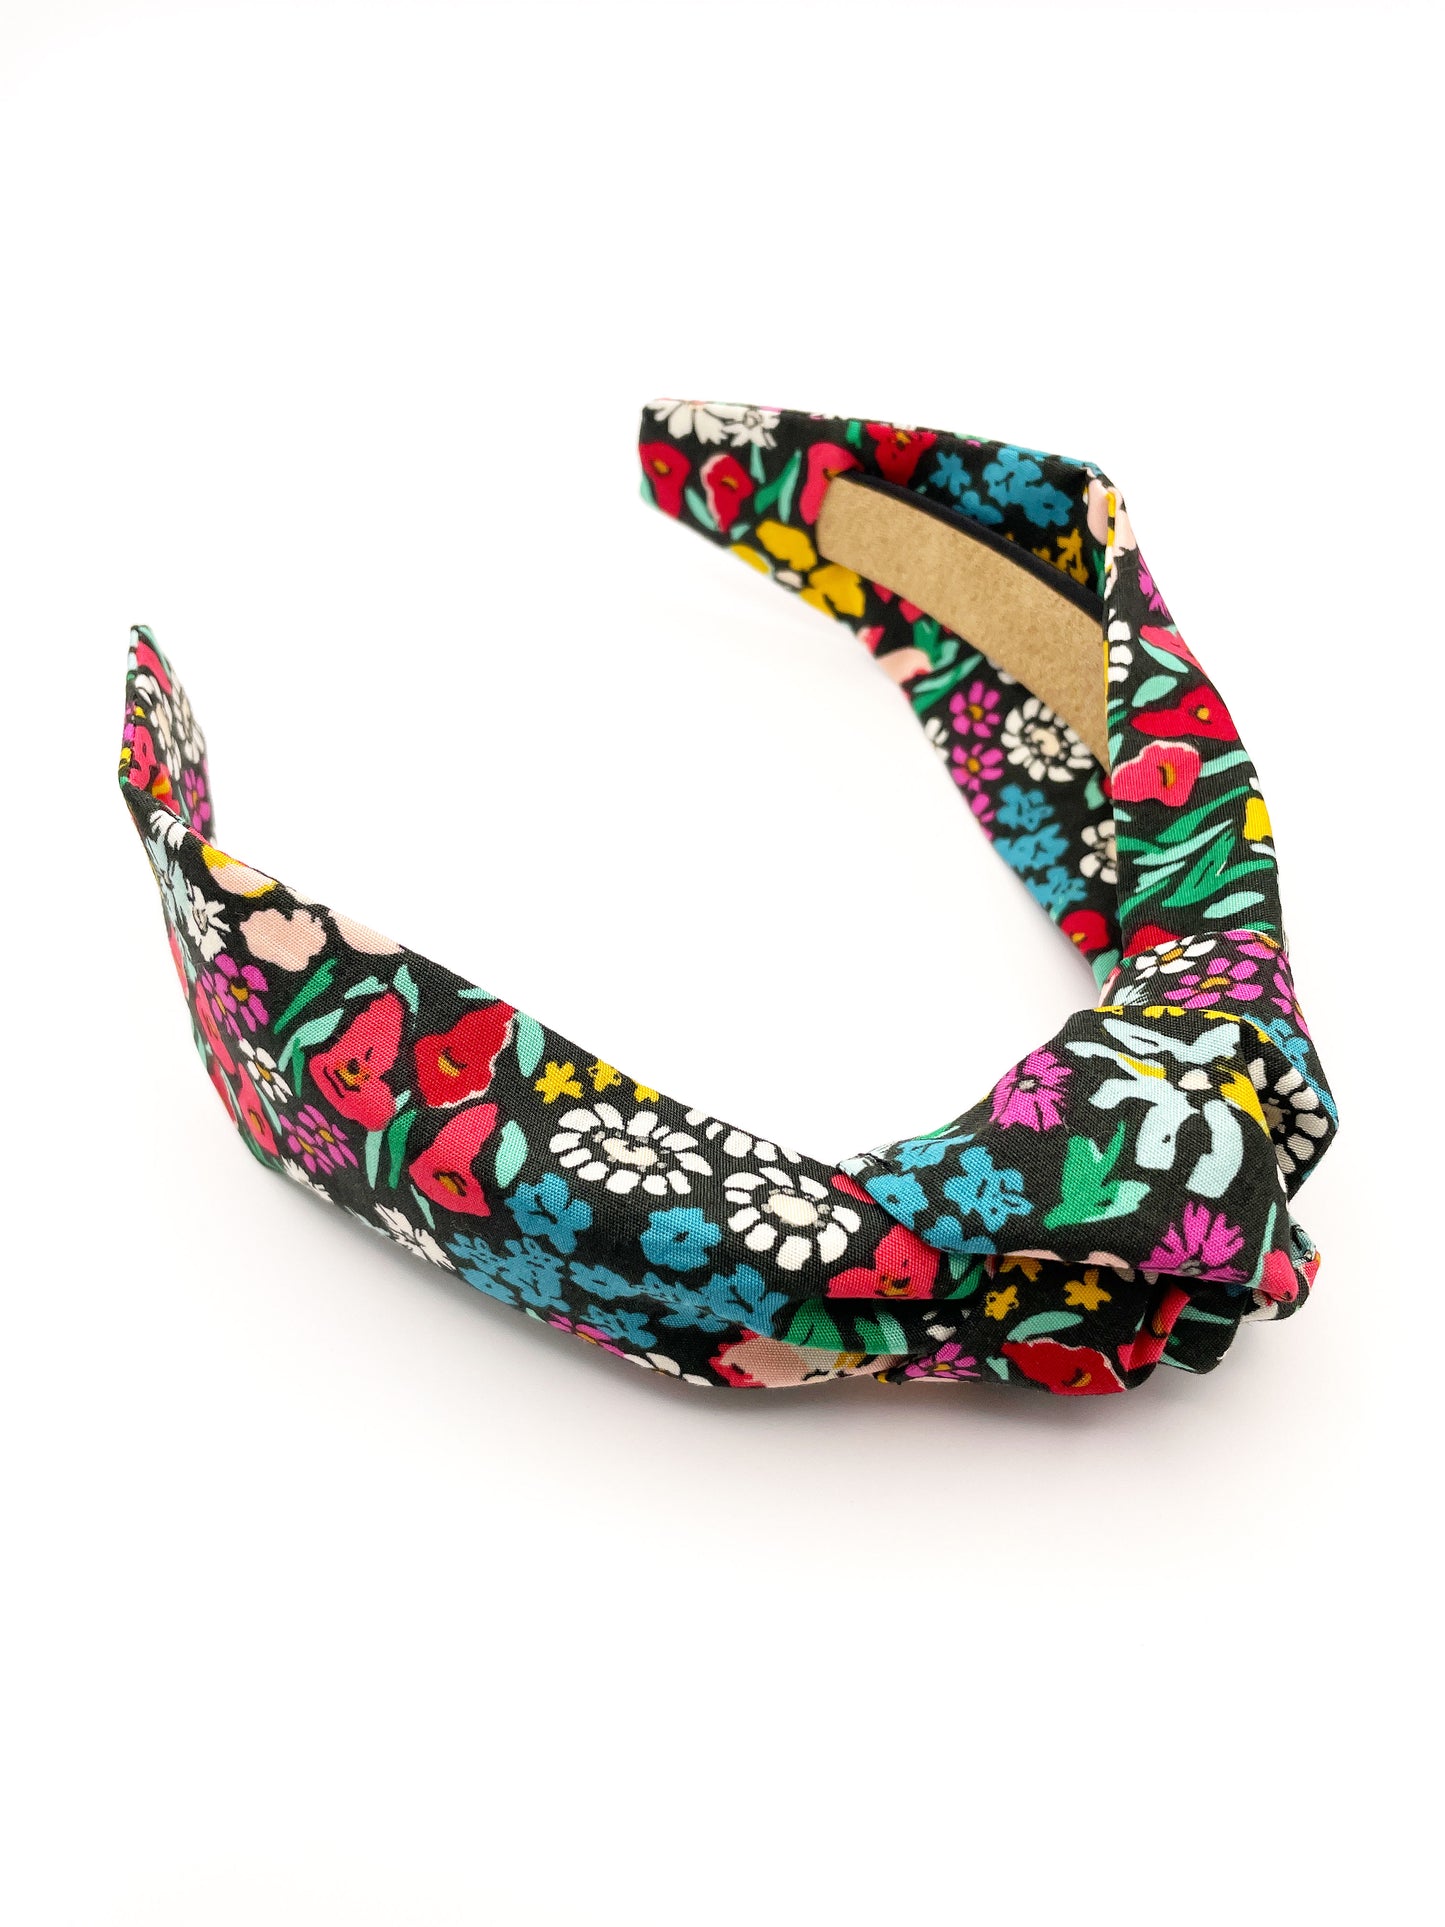 A black handmade knotted headband with a colorful floral print.